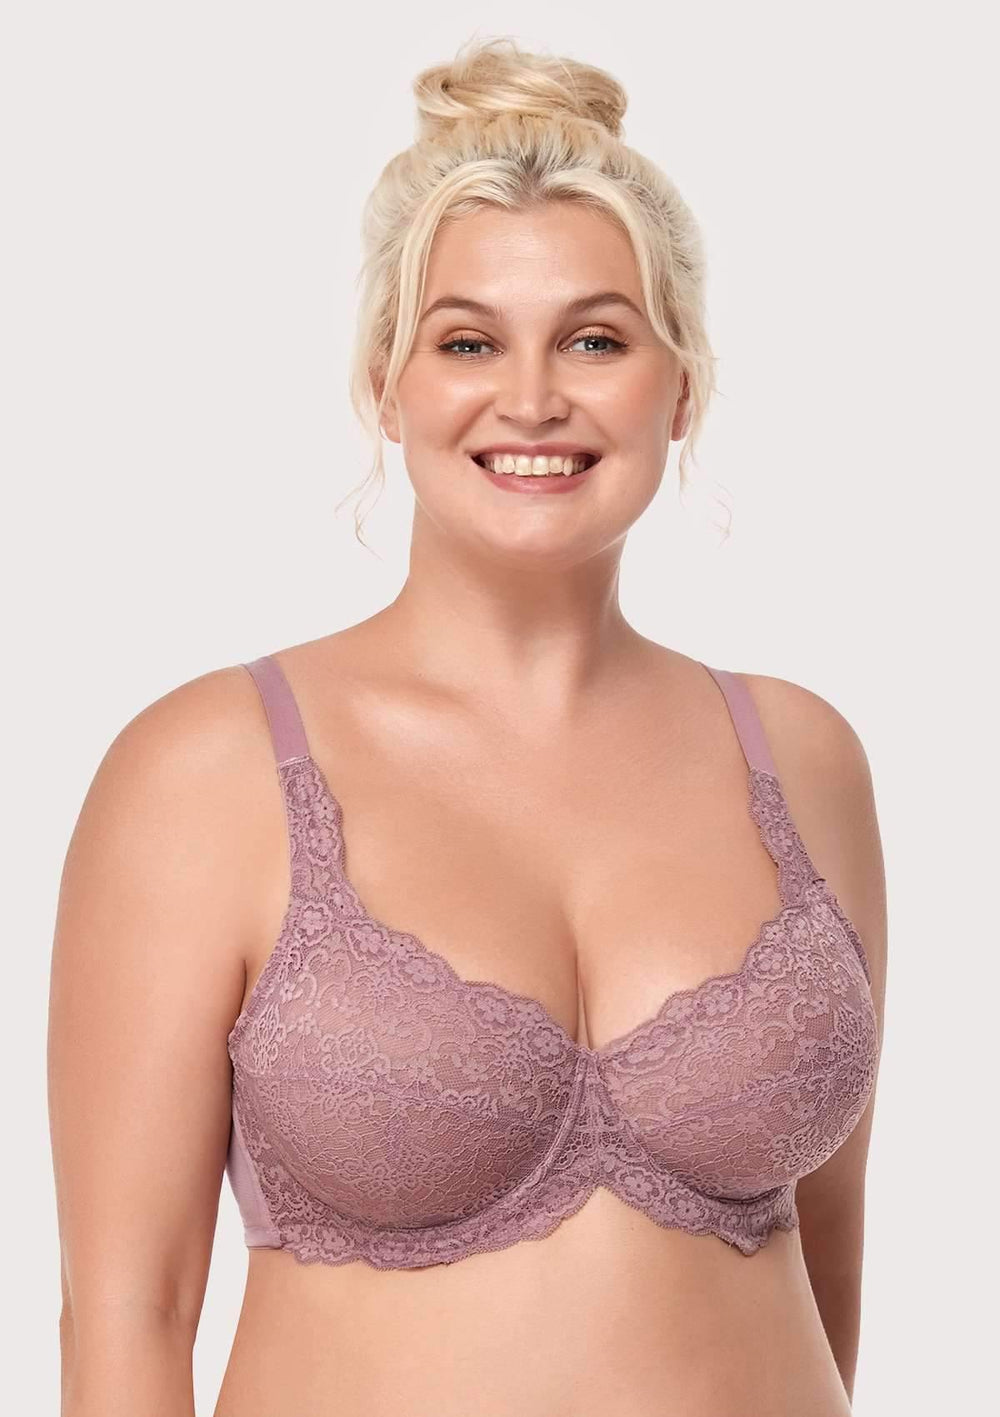 Green Plus Size Lace Bra For Women Full Coverage Big Cup